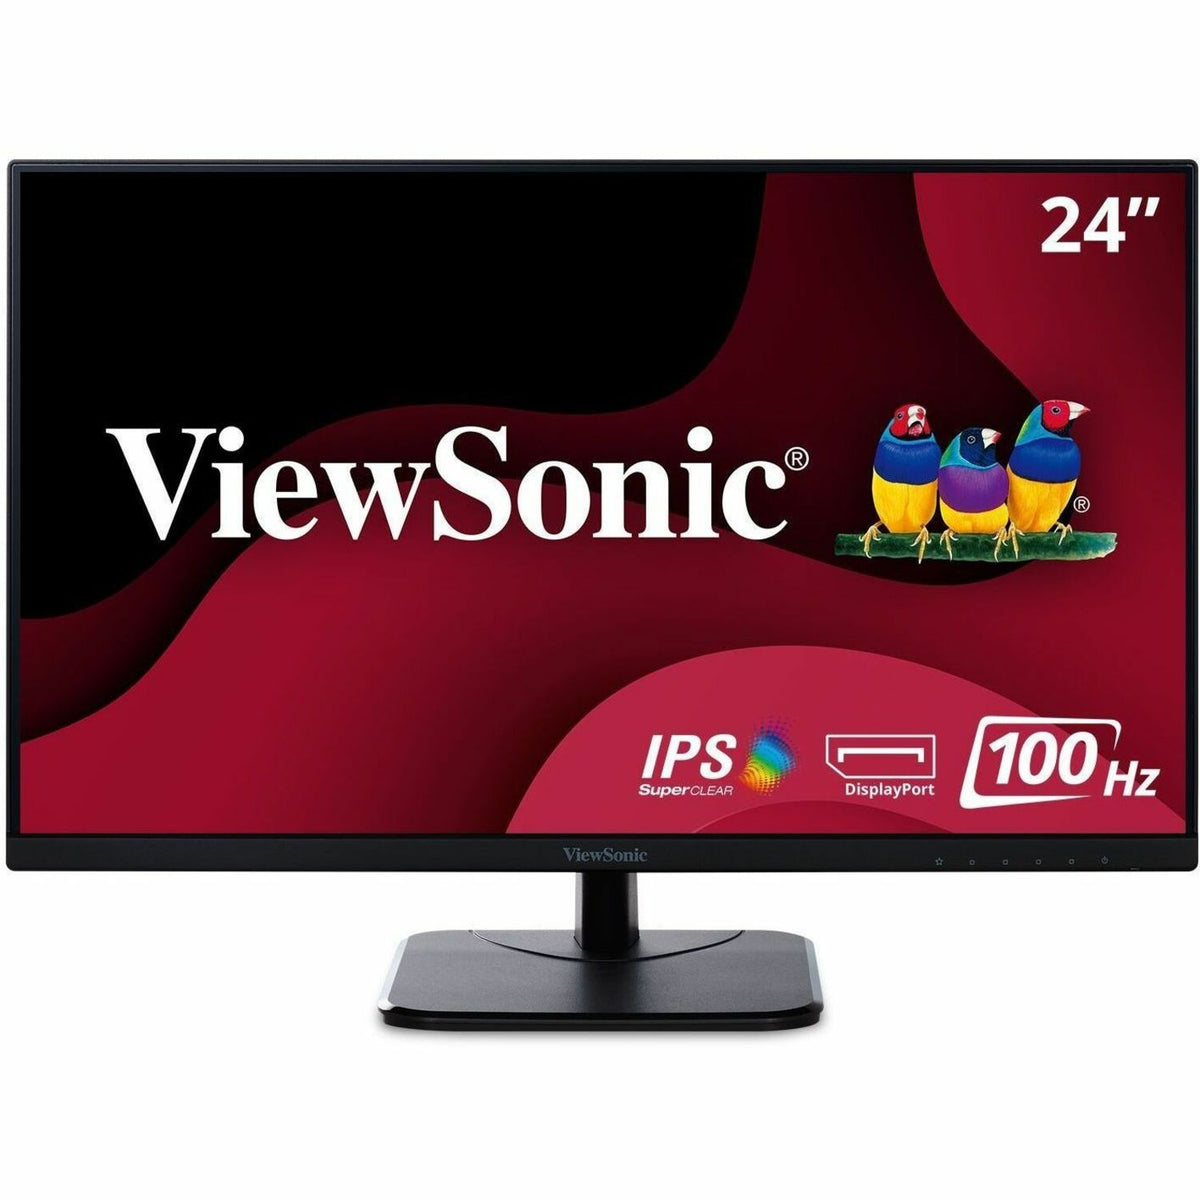 ViewSonic VA2456-MHD 24 Inch IPS 1080p Monitor with 100Hz, Ultra-Thin Bezels, HDMI, DisplayPort and VGA Inputs for Home and Office - VA2456-MHD